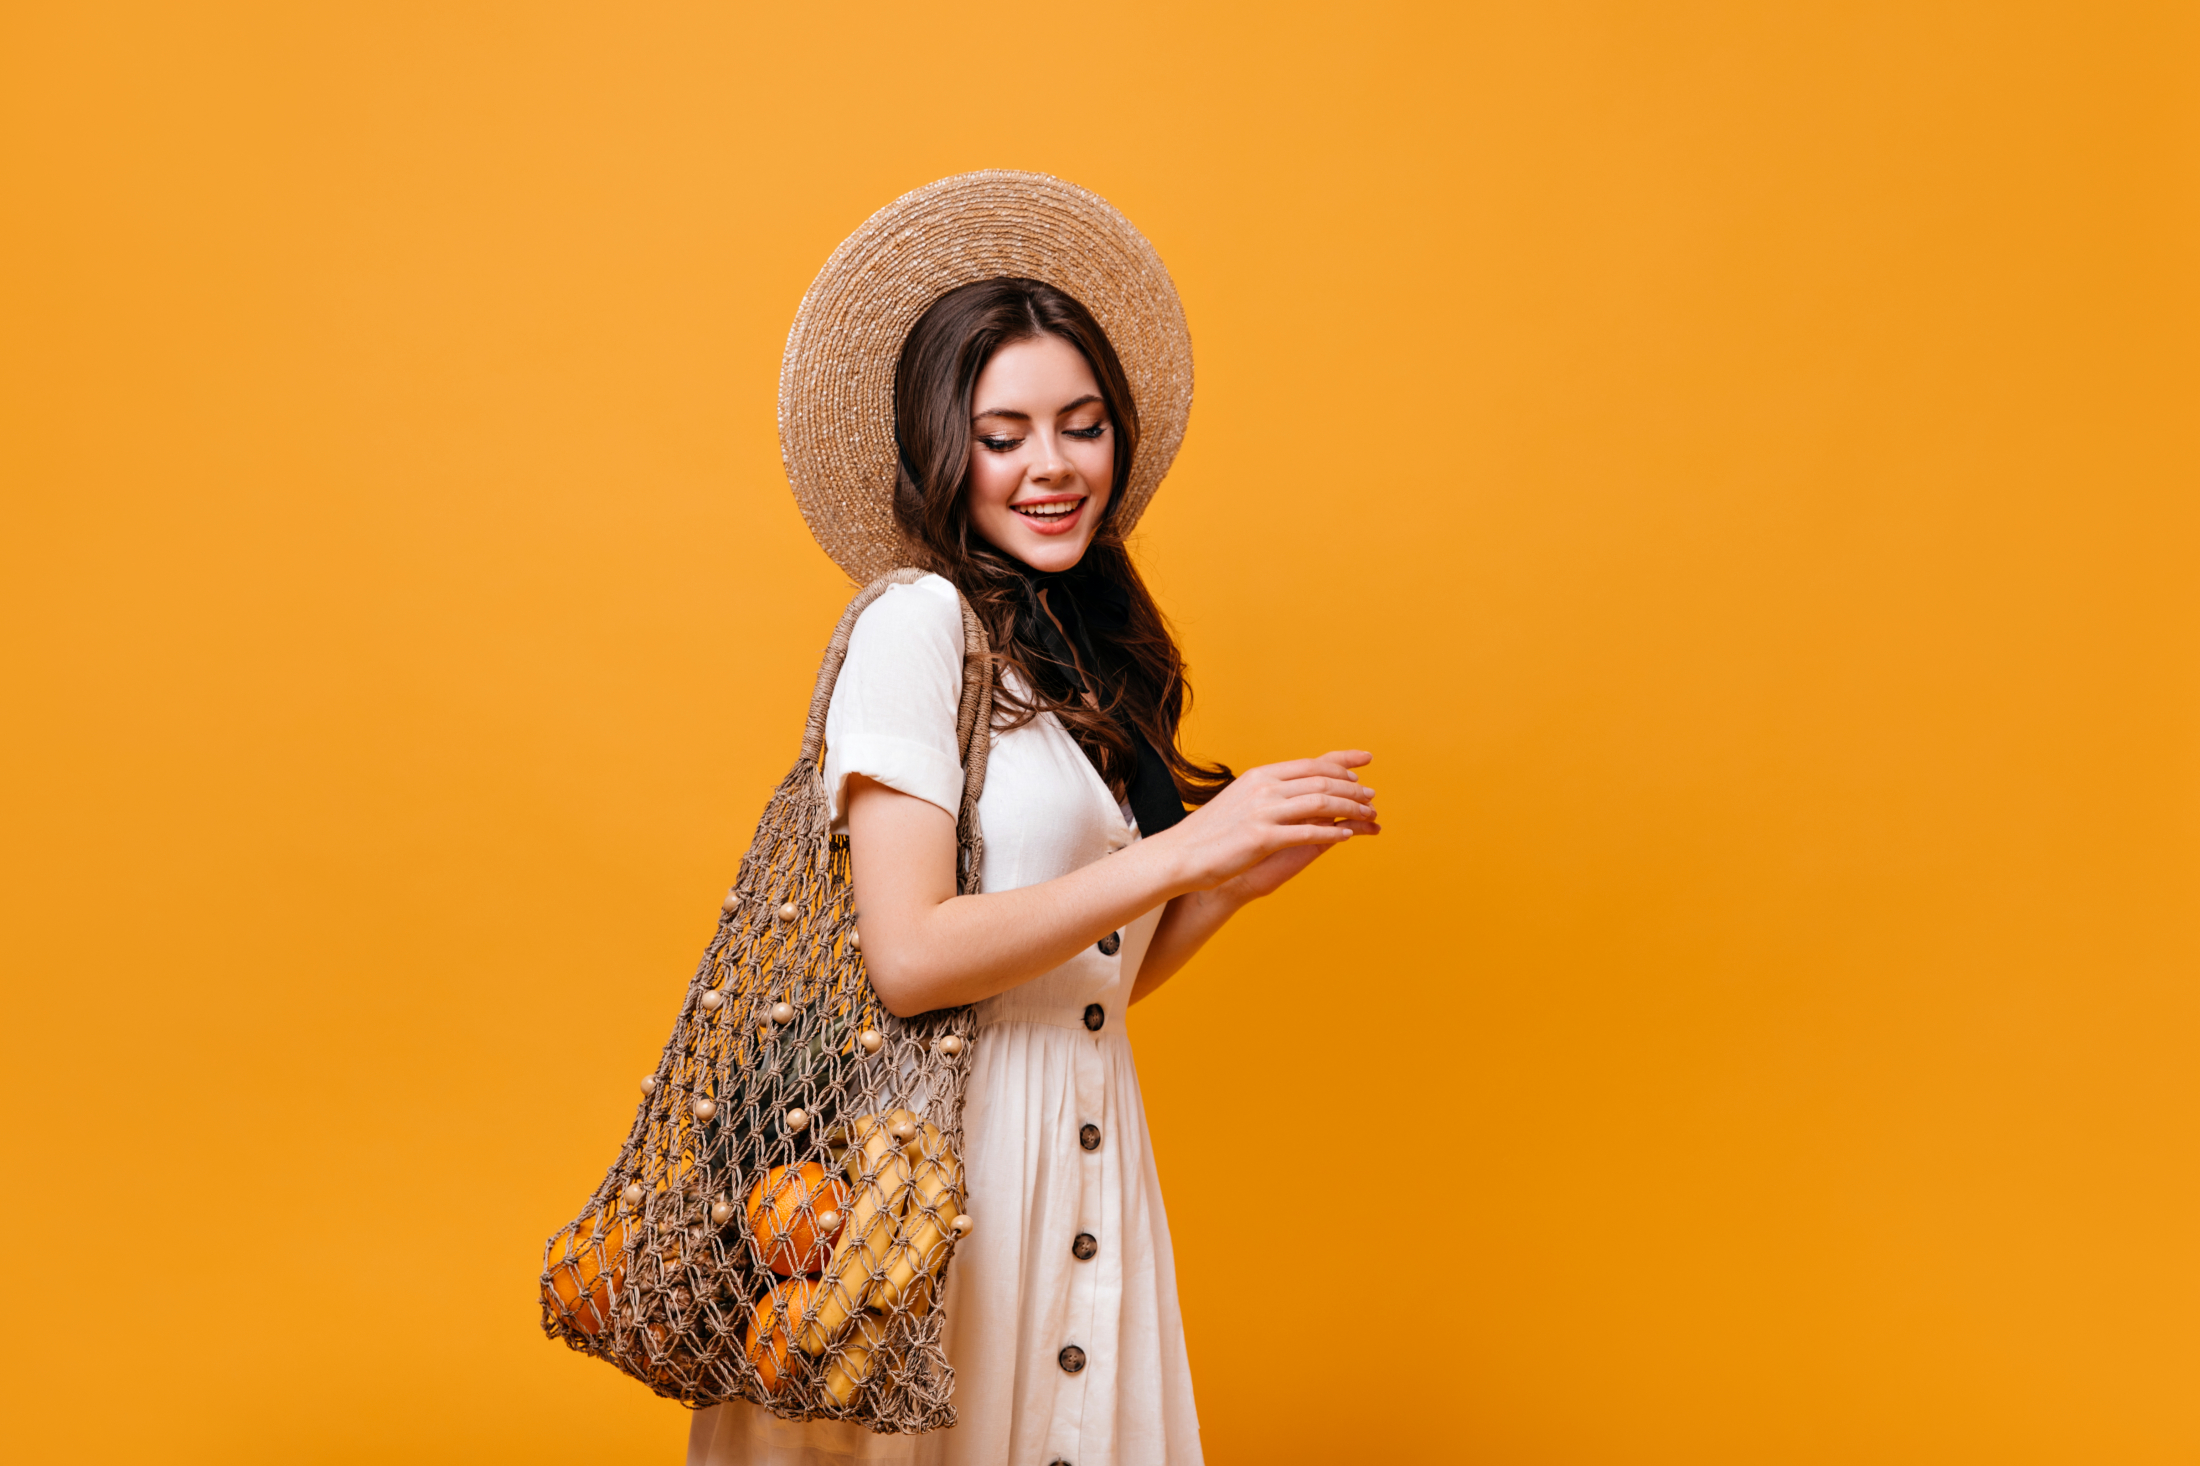 young-brunette-girl-carries-shopping-bag-with-fruit-lady-in-hat-and-white-dress-looks-down-on-orange-background.jpg